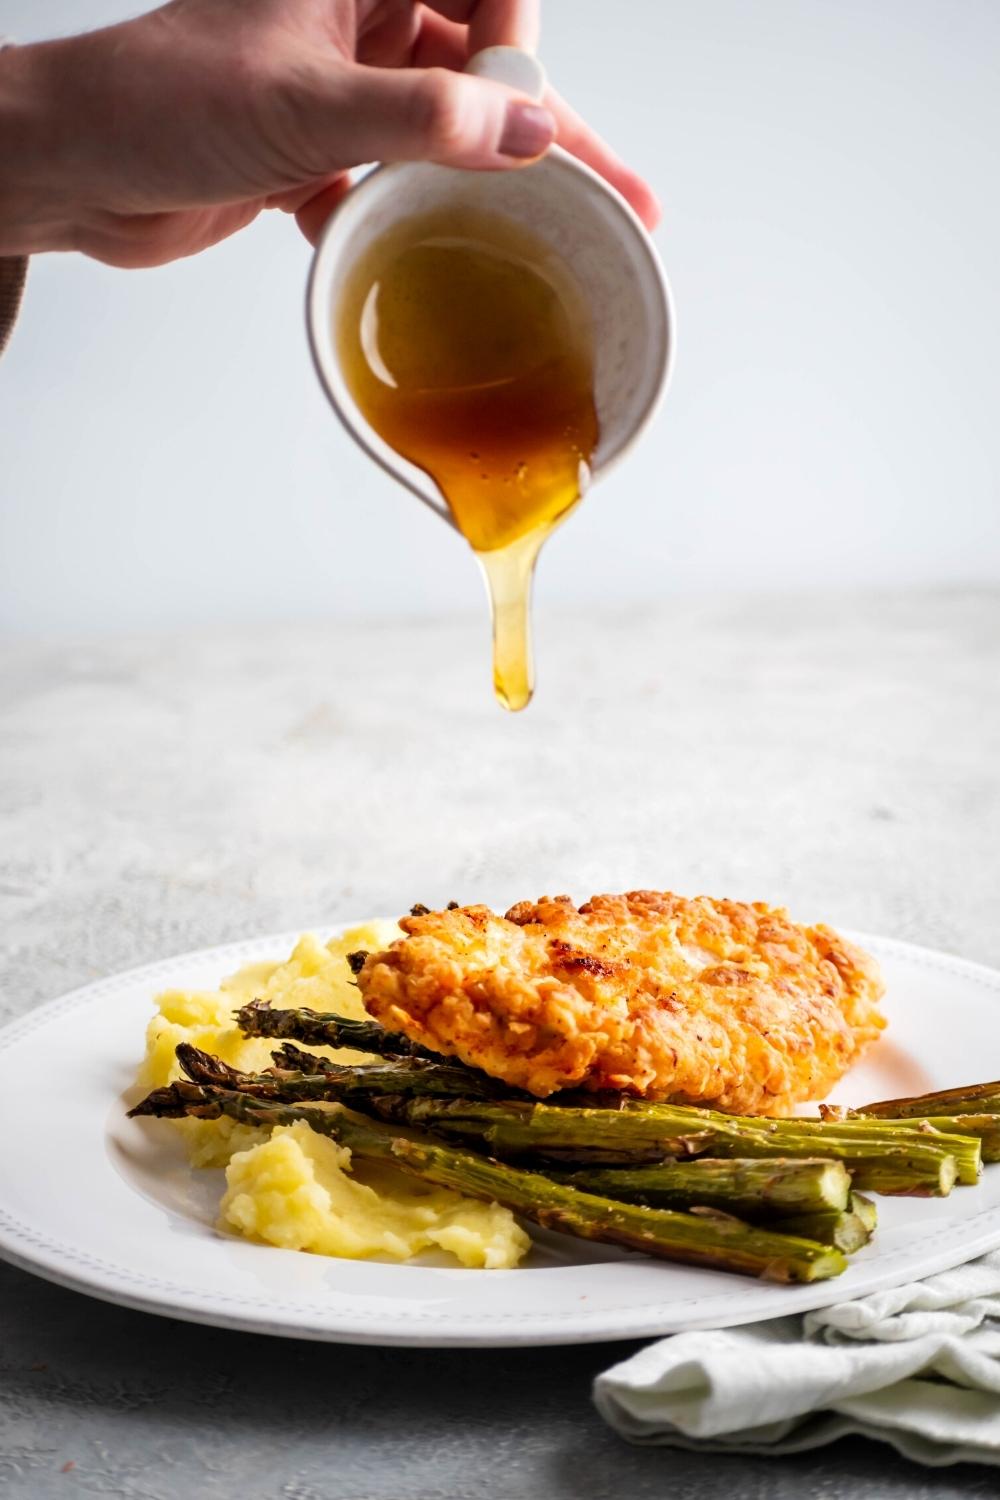 Hand pouring shuffle honey on top of a piece of breaded chicken that is on asparagus and mashed potatoes on a white plate.